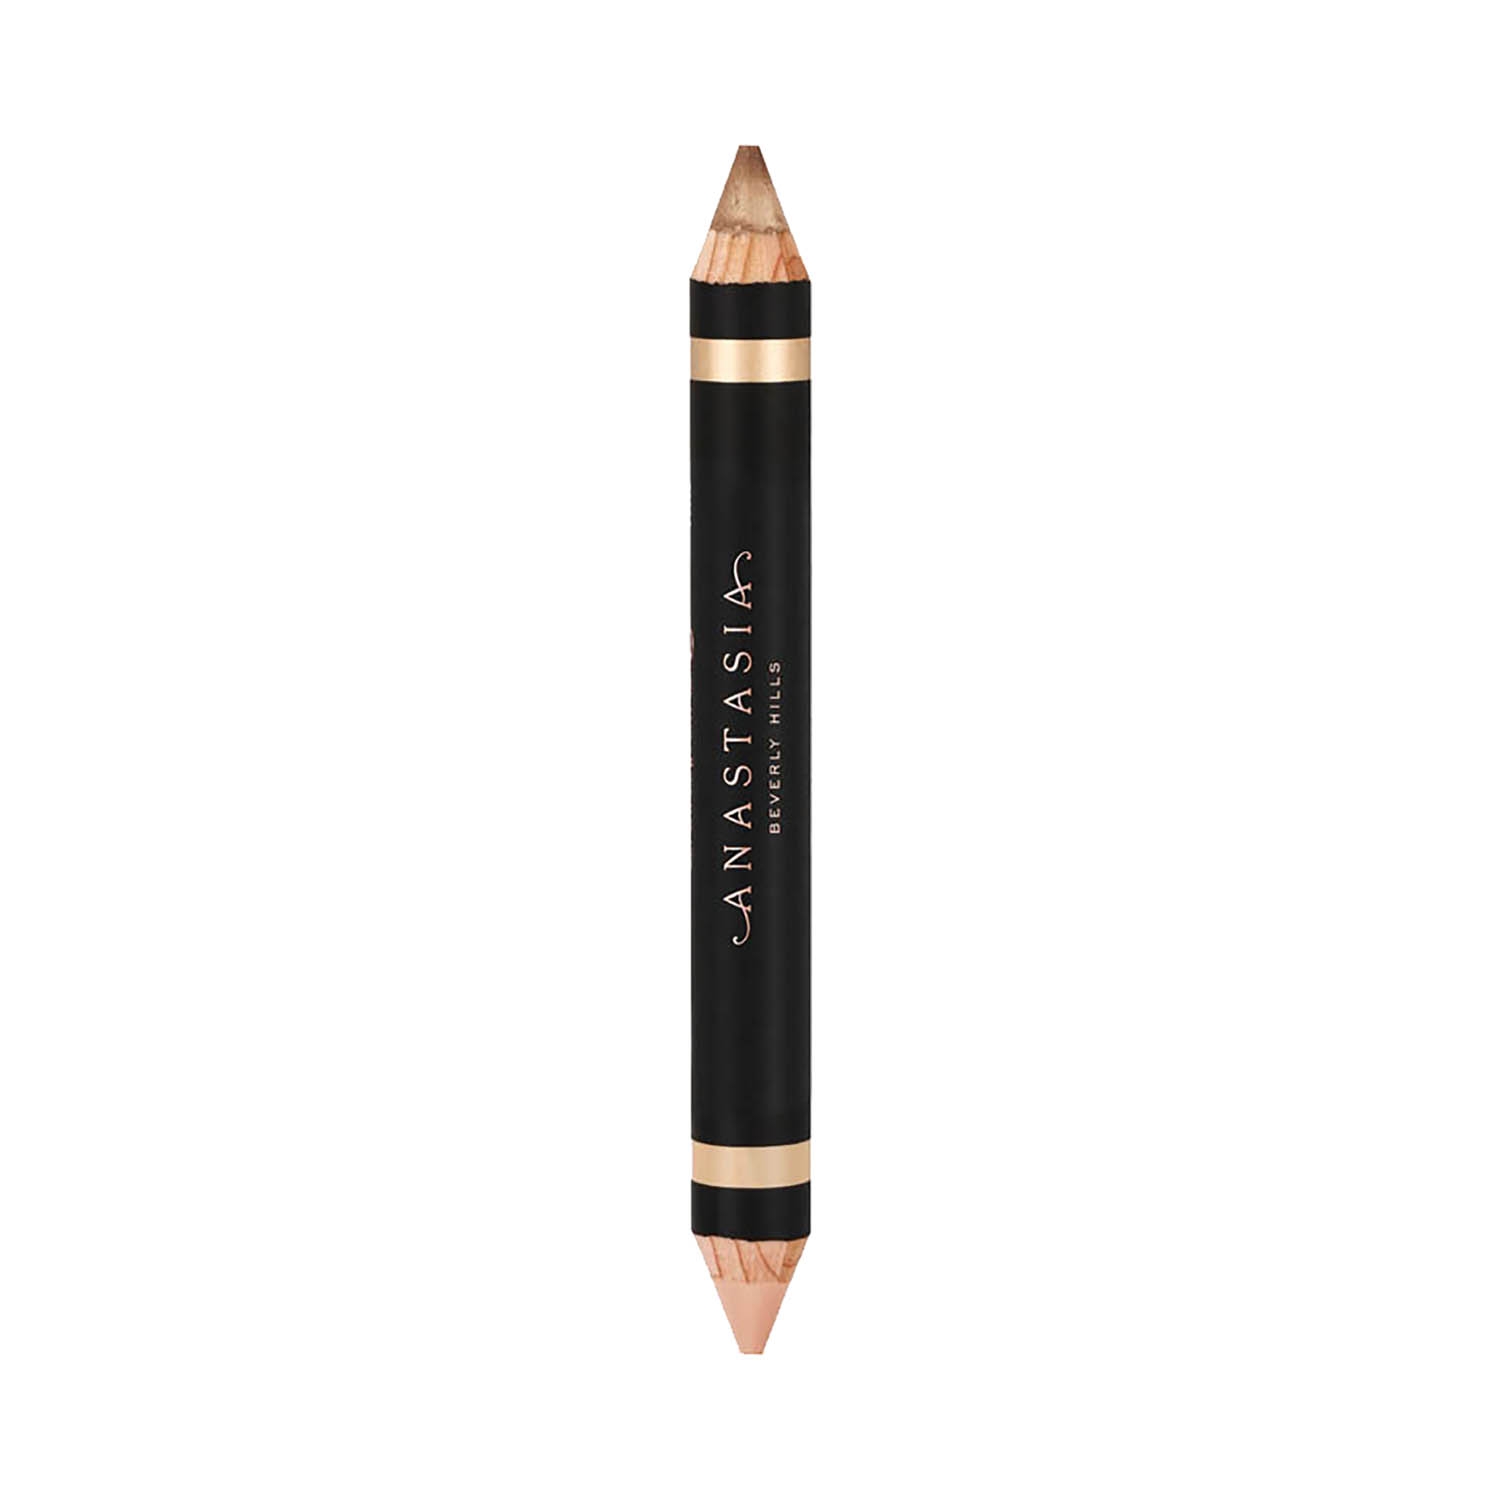 Anastasia Beverly Hills Highlighting Duo Pencil - Matte Shell/Lace Shimmer (4.8g)